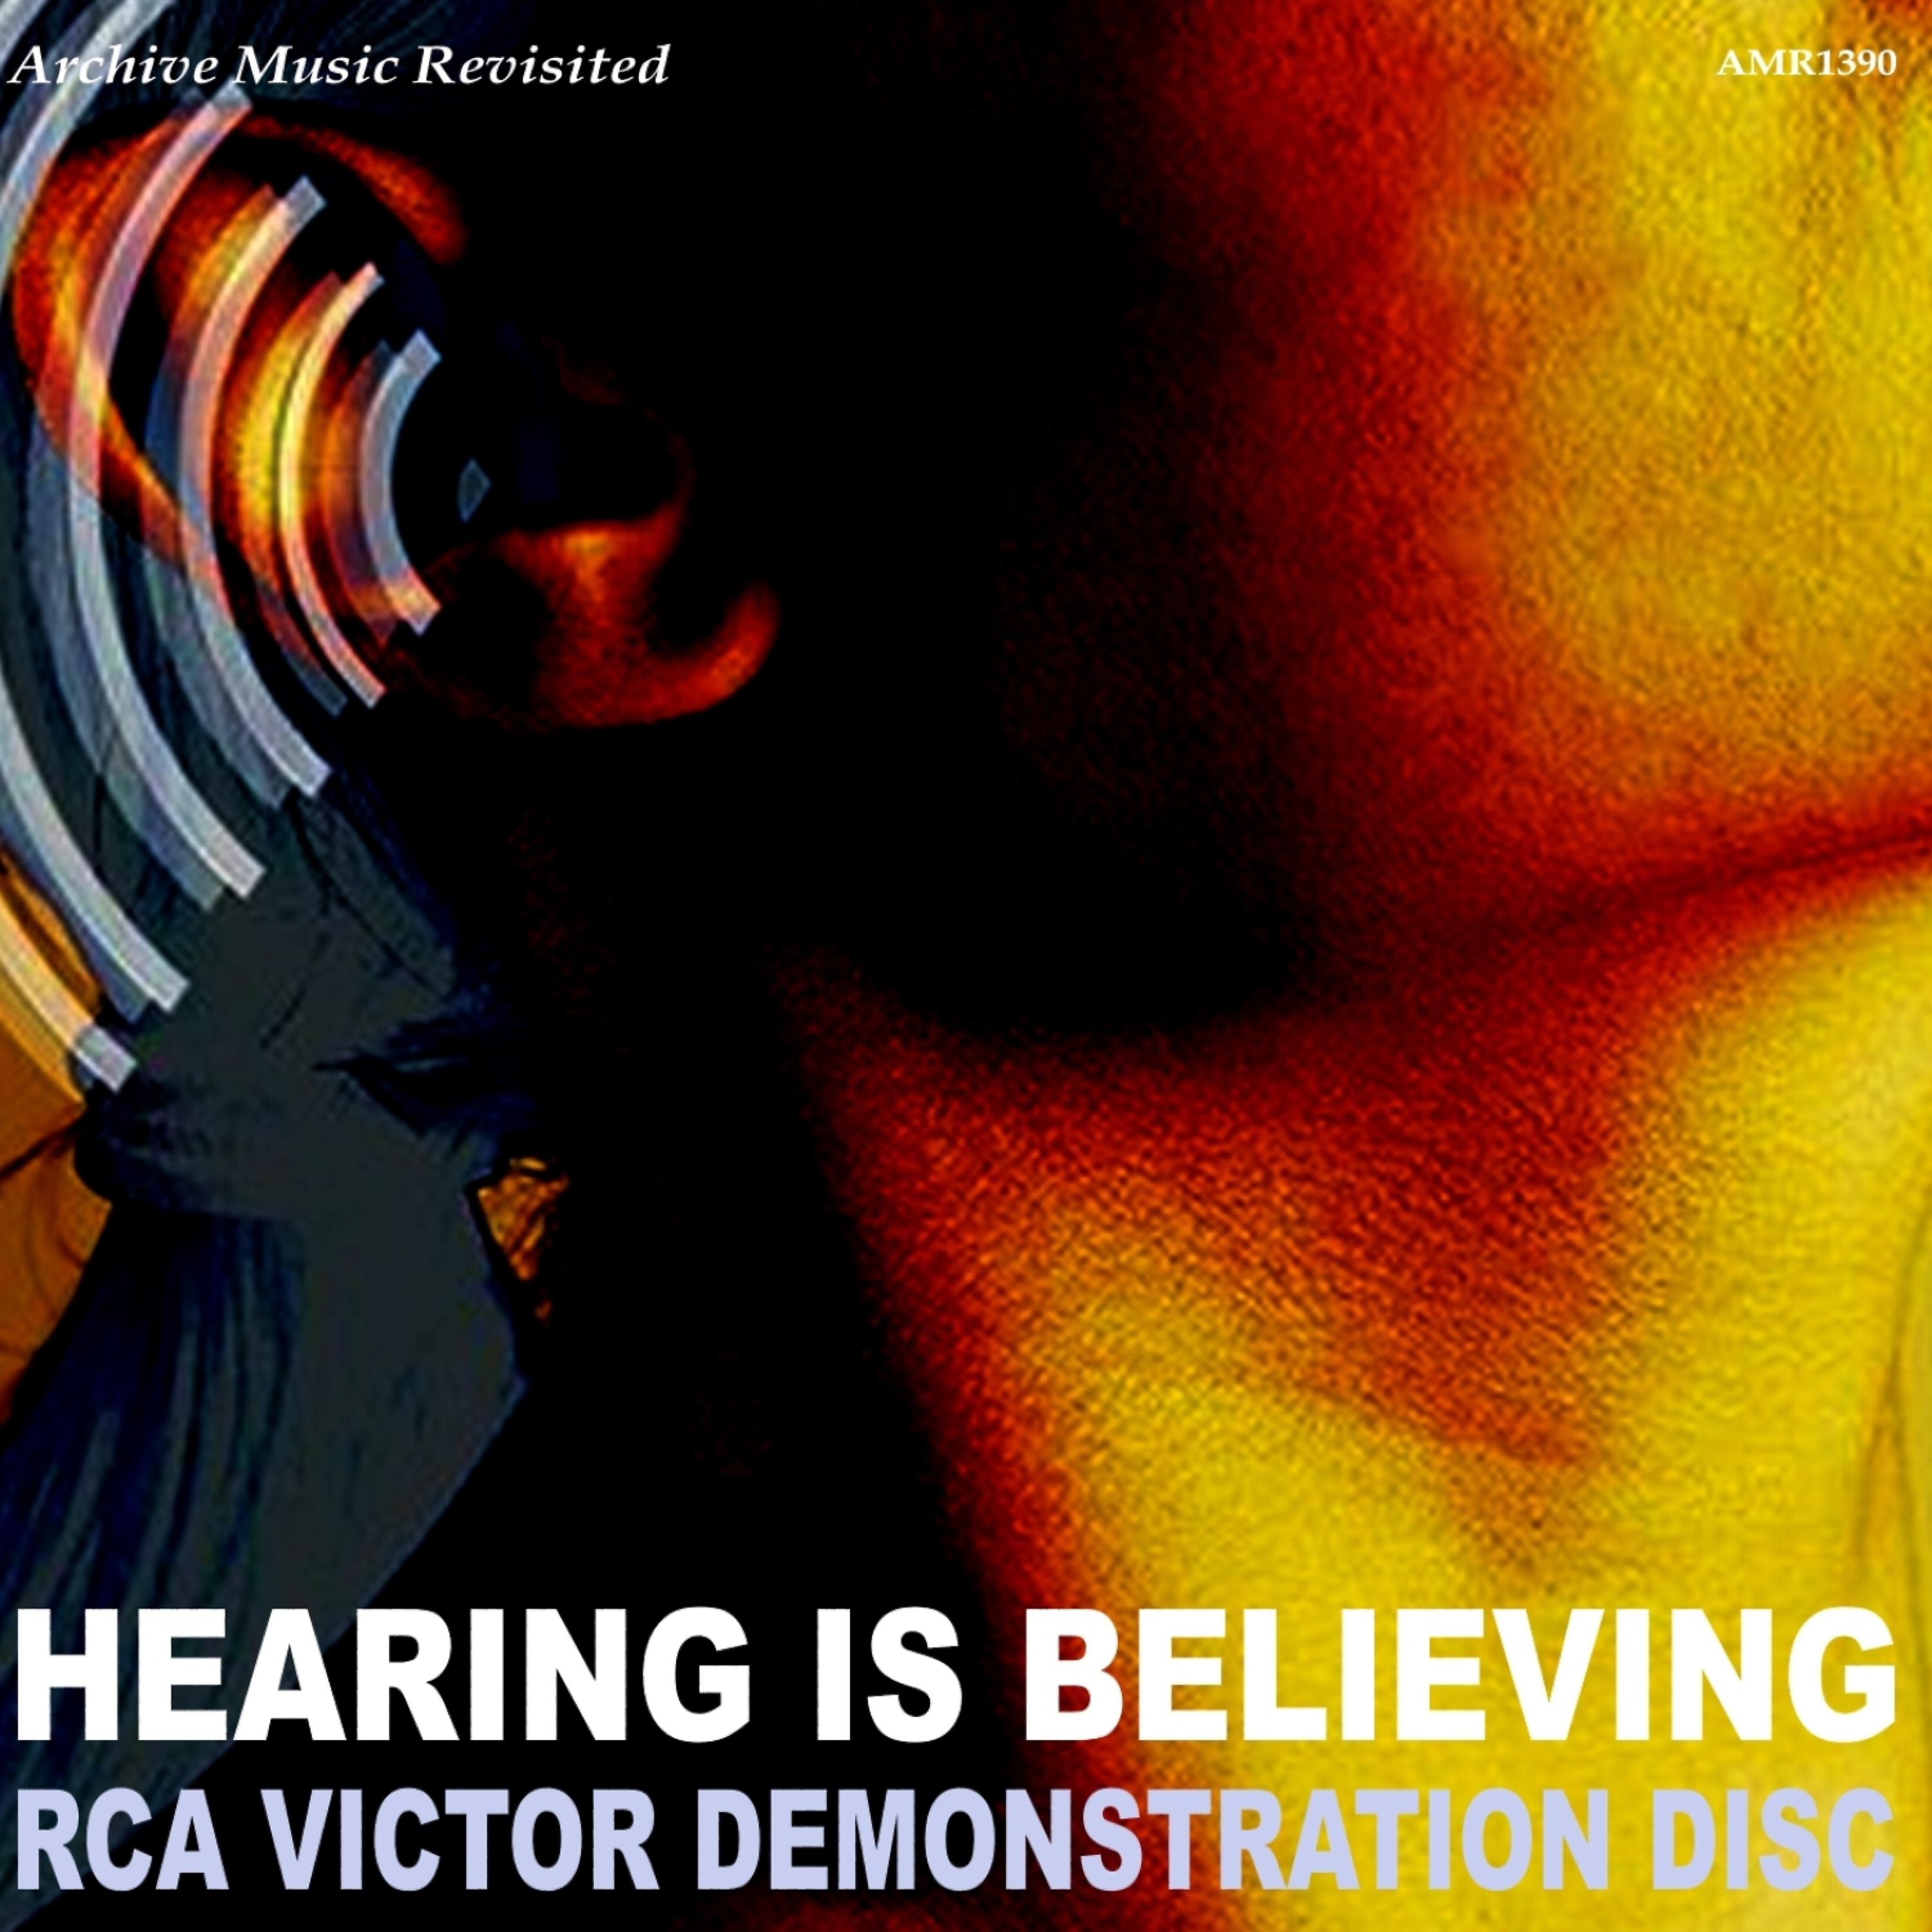 Постер альбома RCA Victor Demonstration Disc - "Hearing Is Believing"